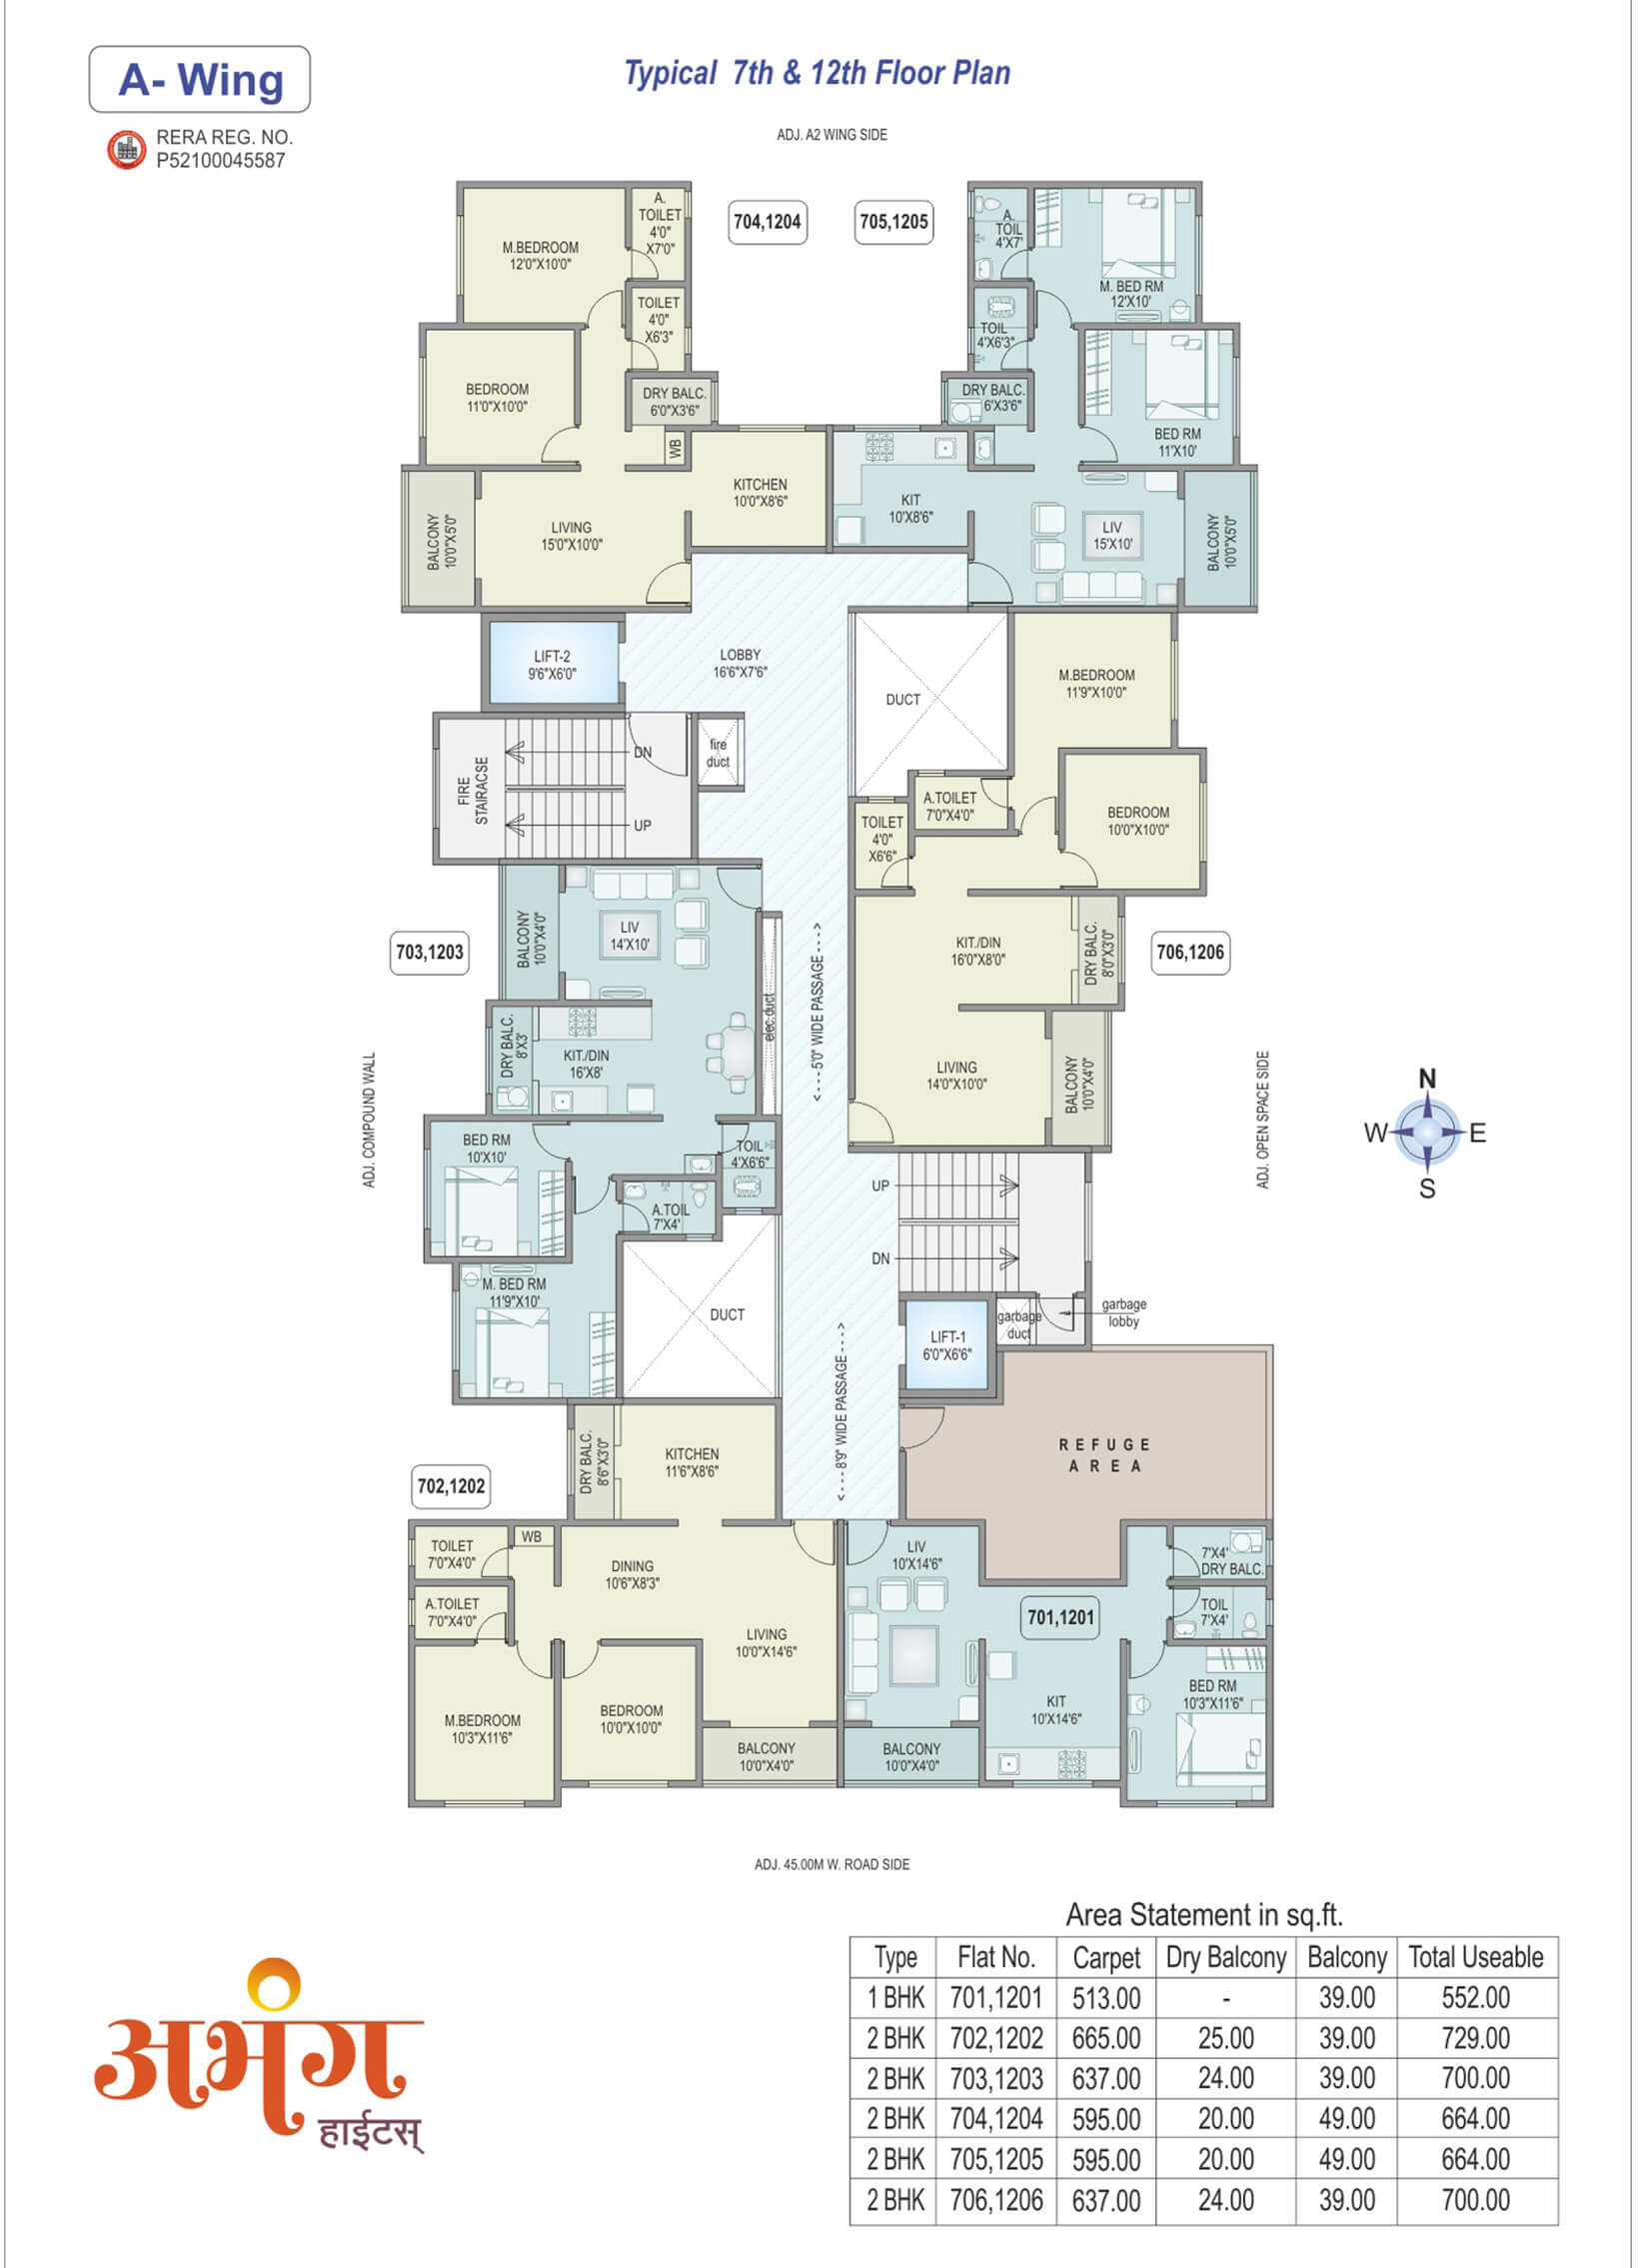 Abhang Heights - 7th and 12th Floor Plan